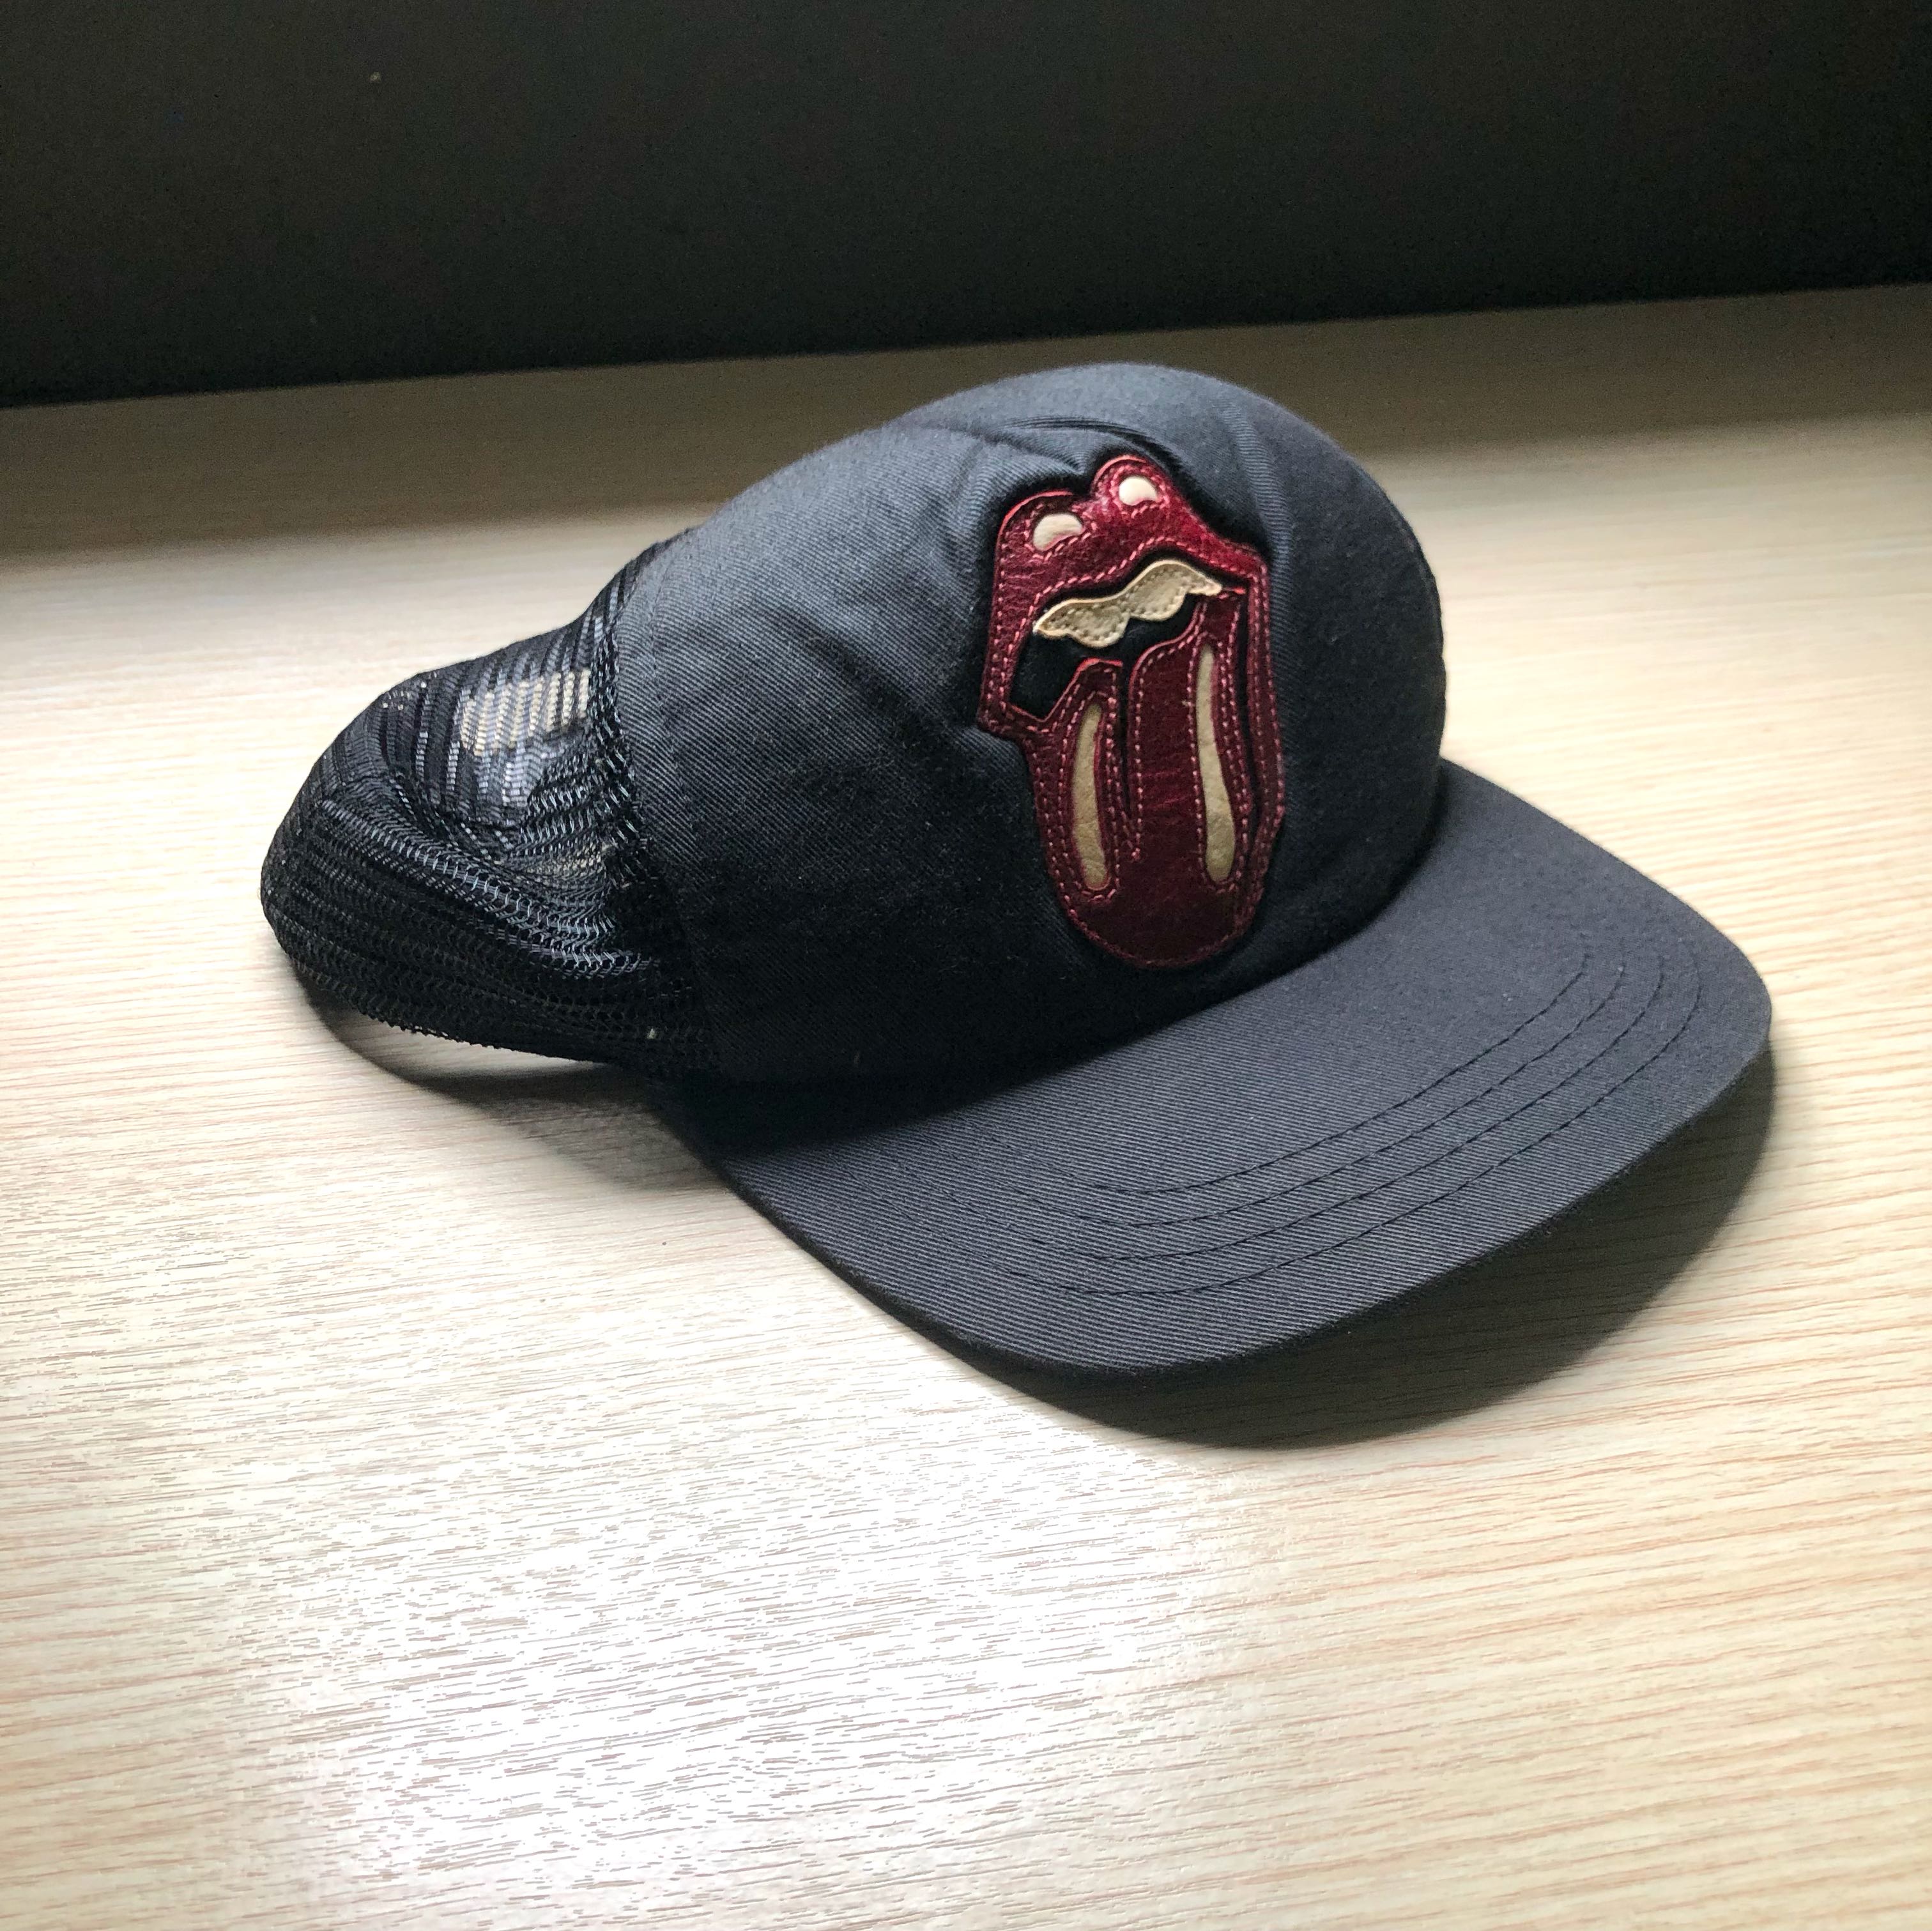 Chrome hearts rolling stones hat